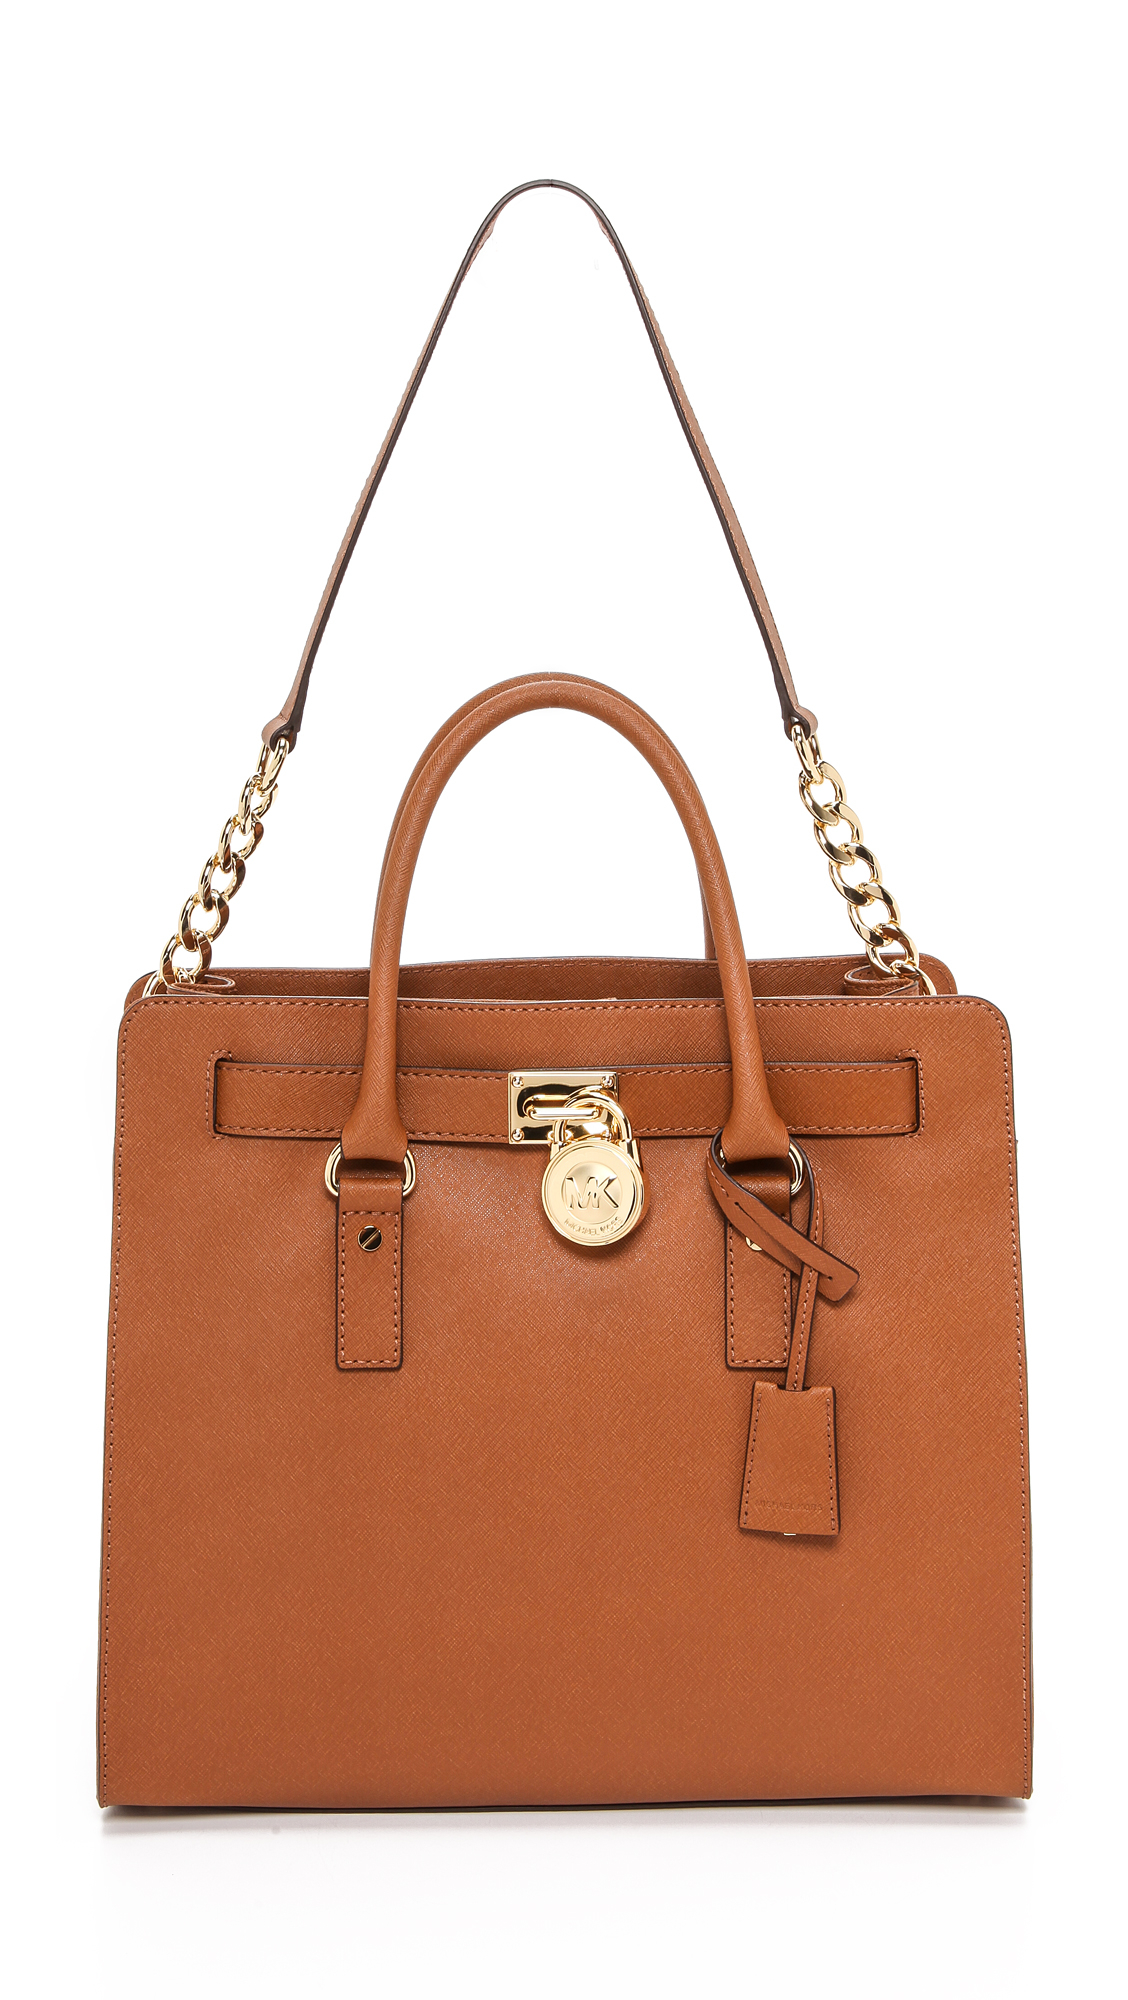 FREE DELIVERY Michael Kors Hamilton Large Tote